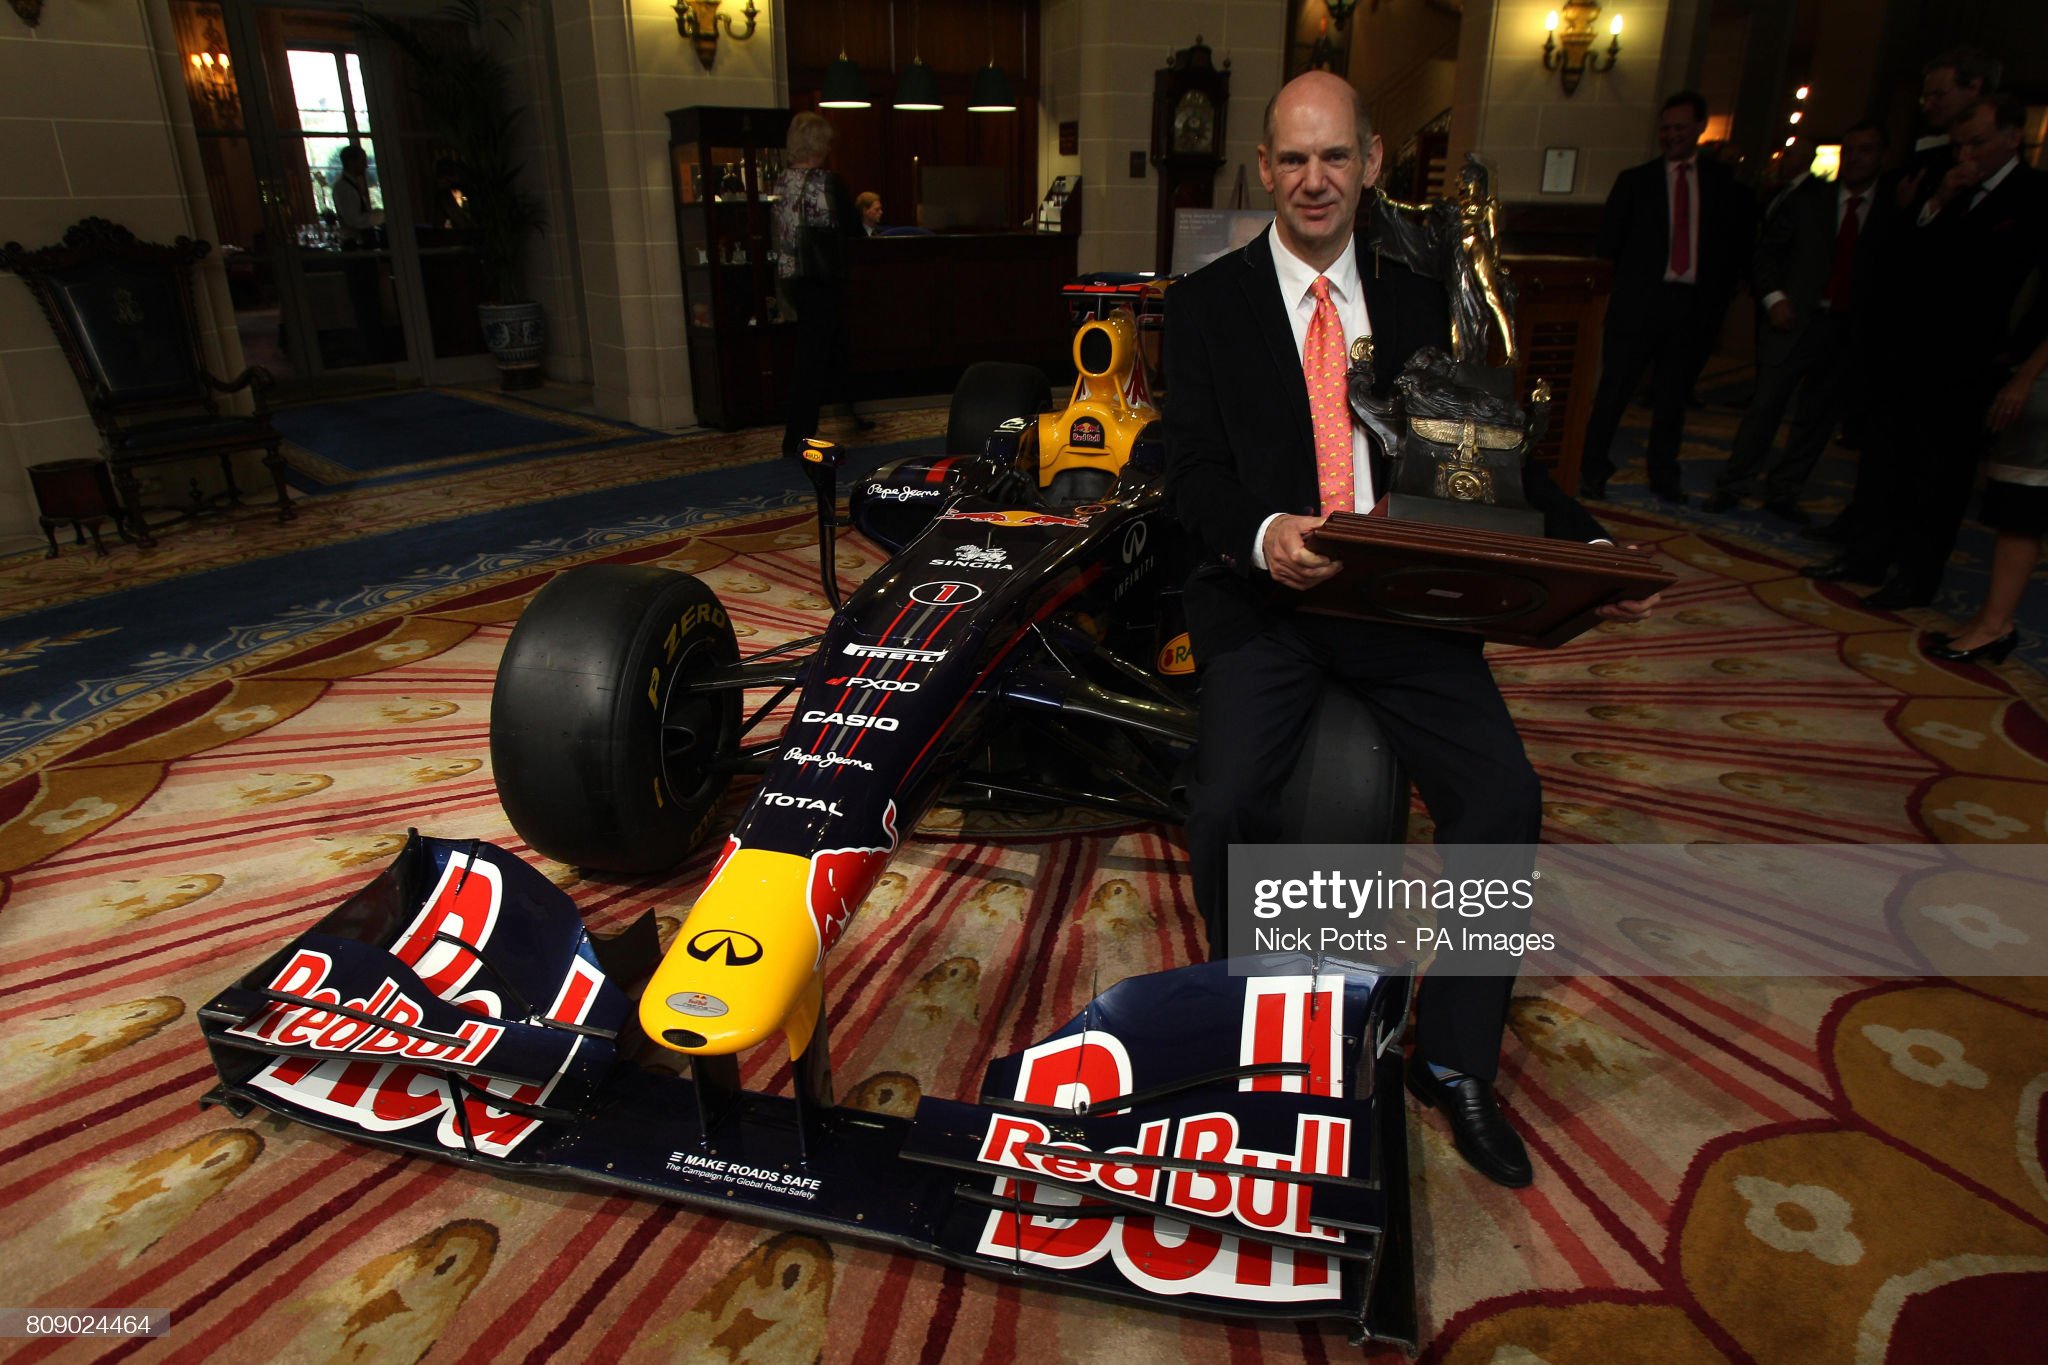 Adrian Newey holds the Segrave Trophy, an award presented by The Royal Automobile Club at the RAC Club, London, on 30 March 2011. 